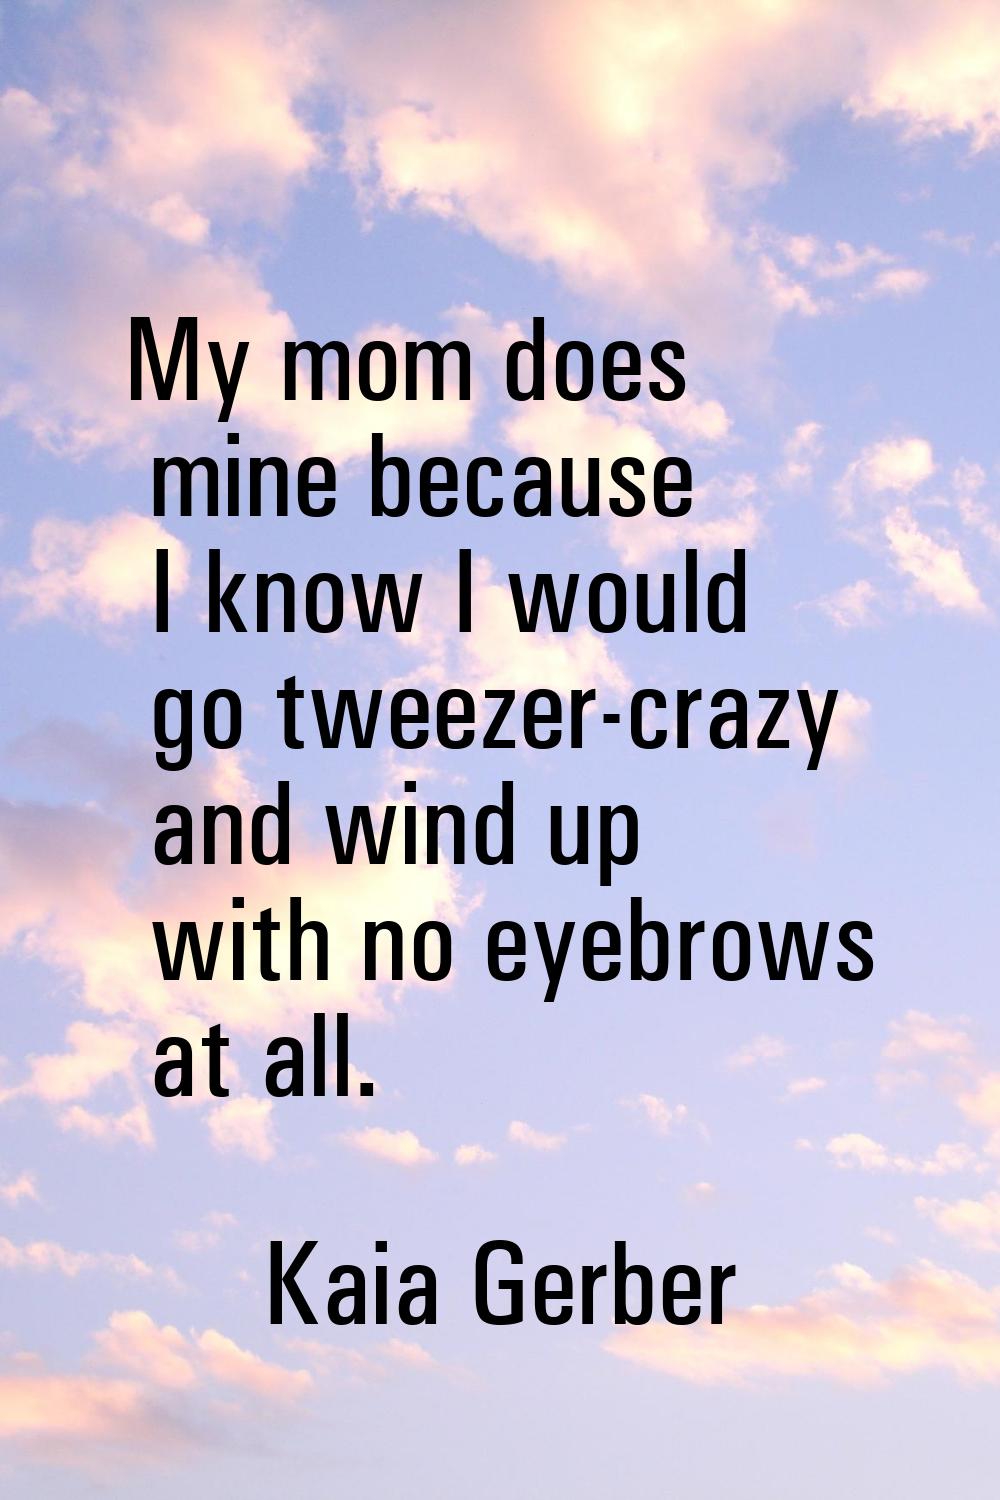 My mom does mine because I know I would go tweezer-crazy and wind up with no eyebrows at all.